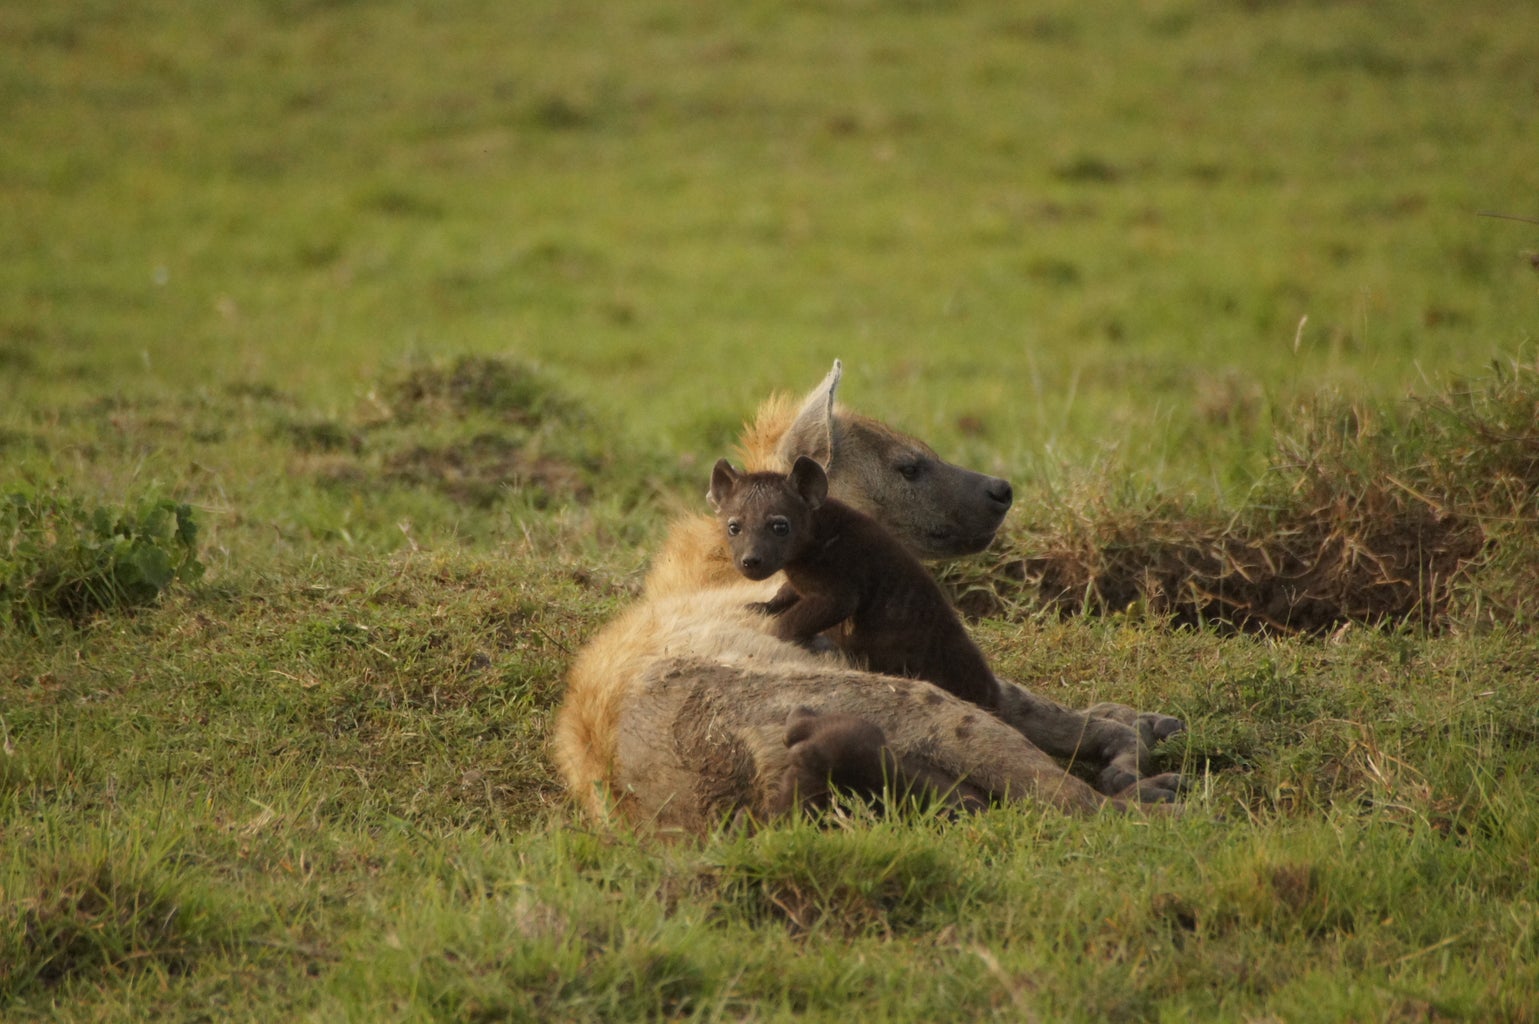 A spotted hyena cub standing on top of its mother.